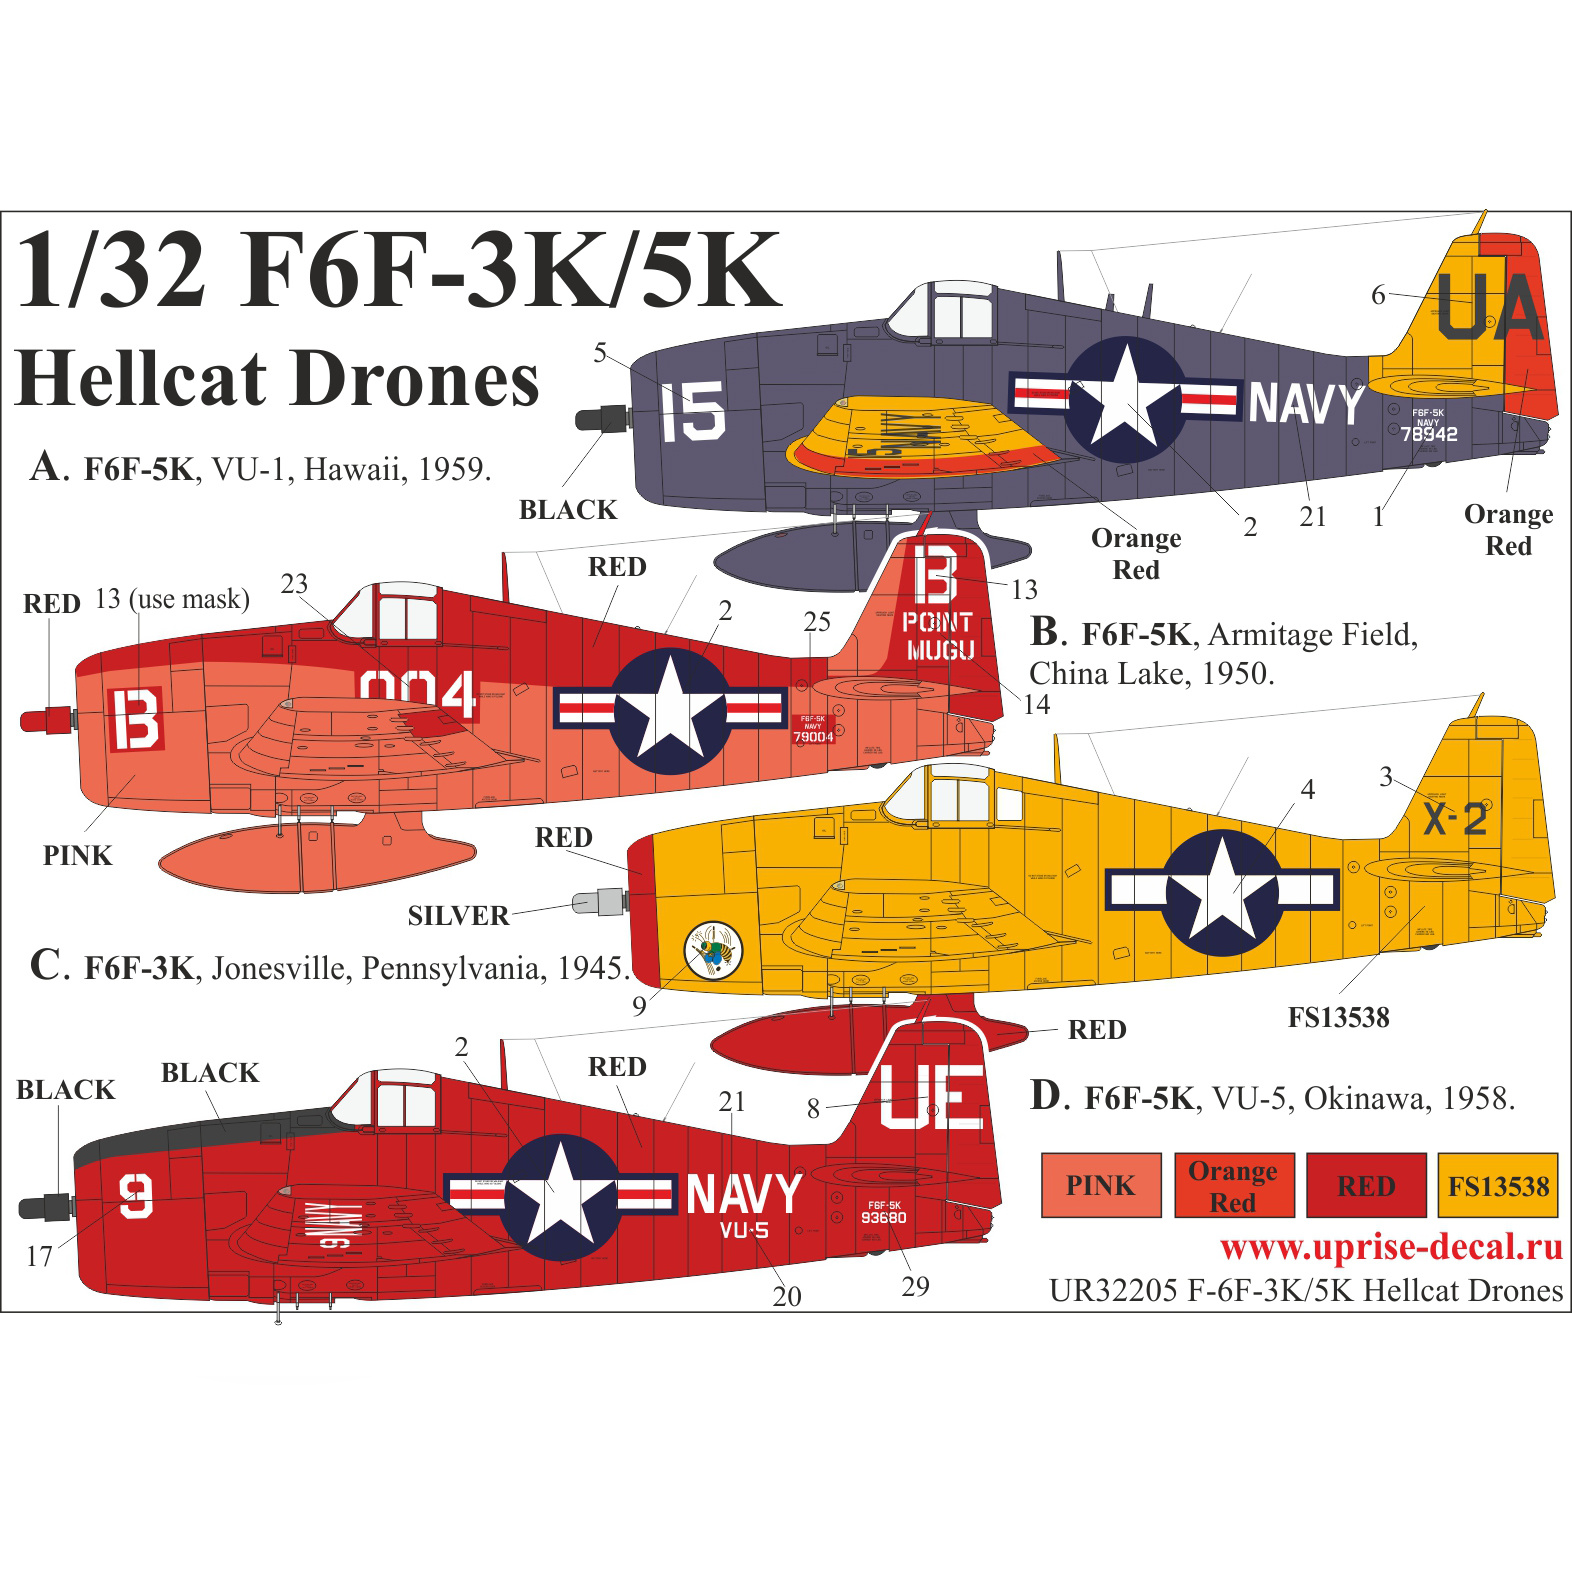 UR32205 Sunrise 1/32 Decal for F6F-3K/5K Hellcat Drones since. inscriptions, FFA (removable lacquer substrate) 